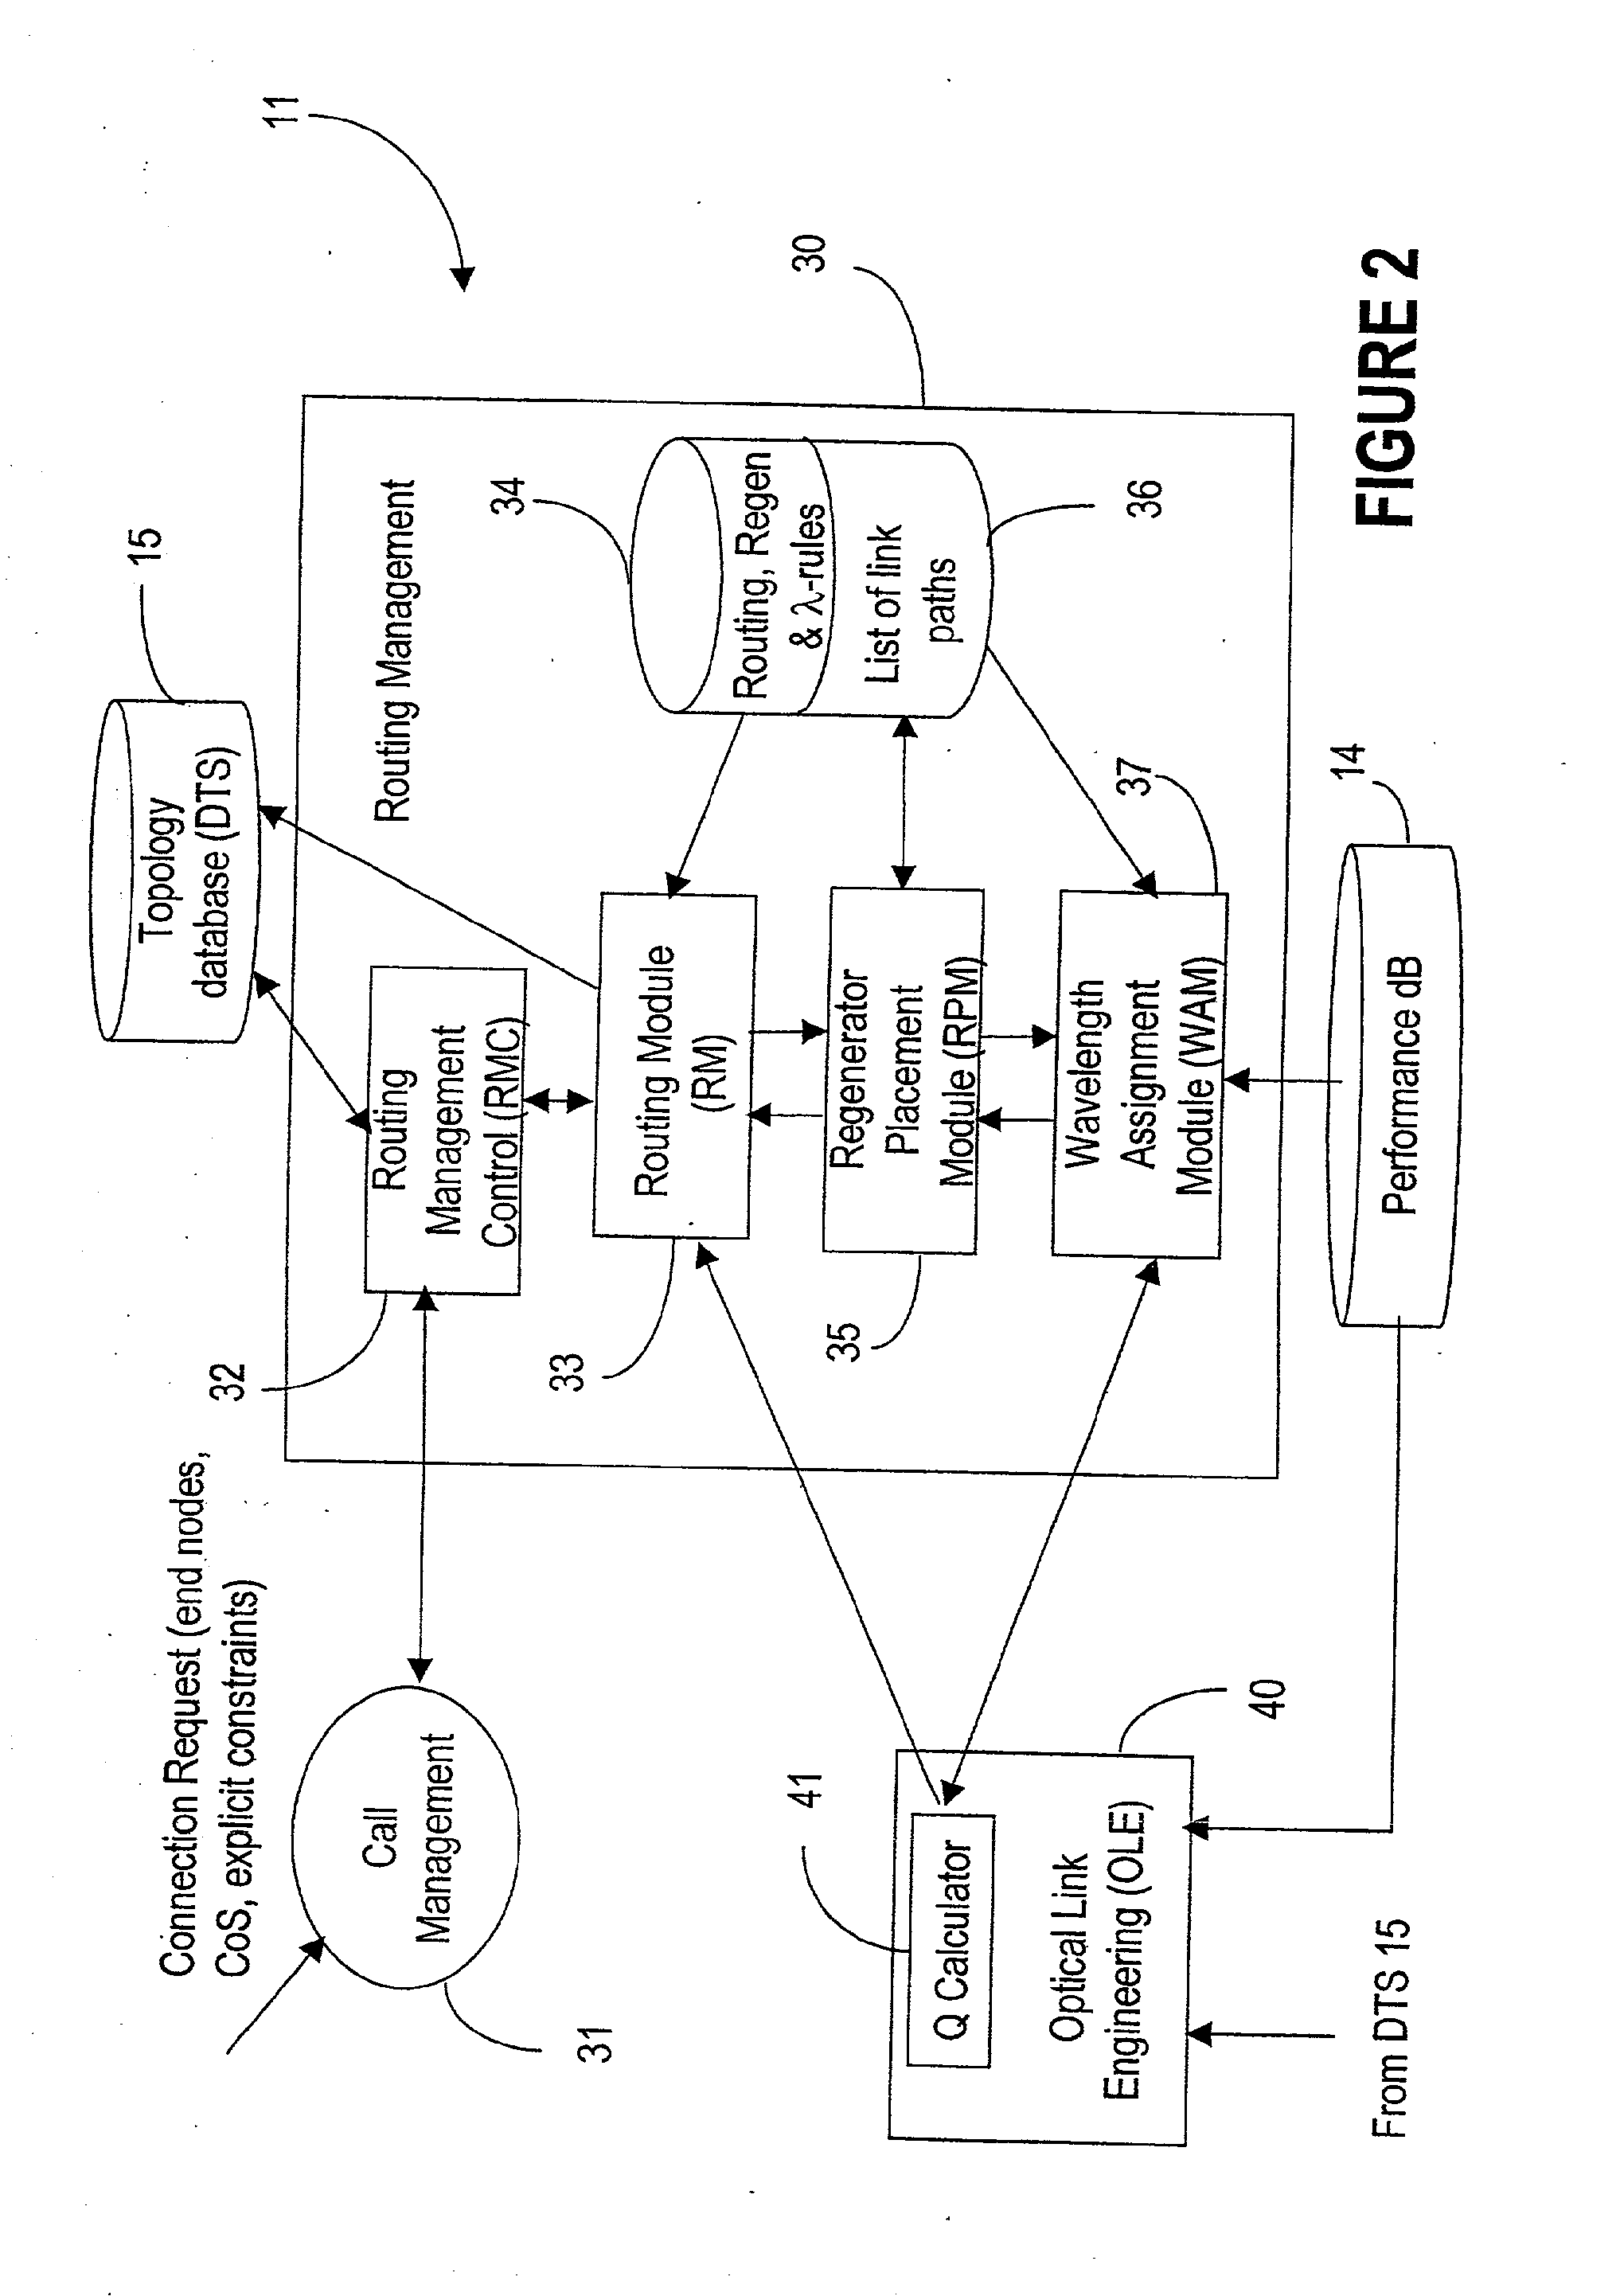 Regenerators Placement Mechanism For Wavelength Switched Optical Networks